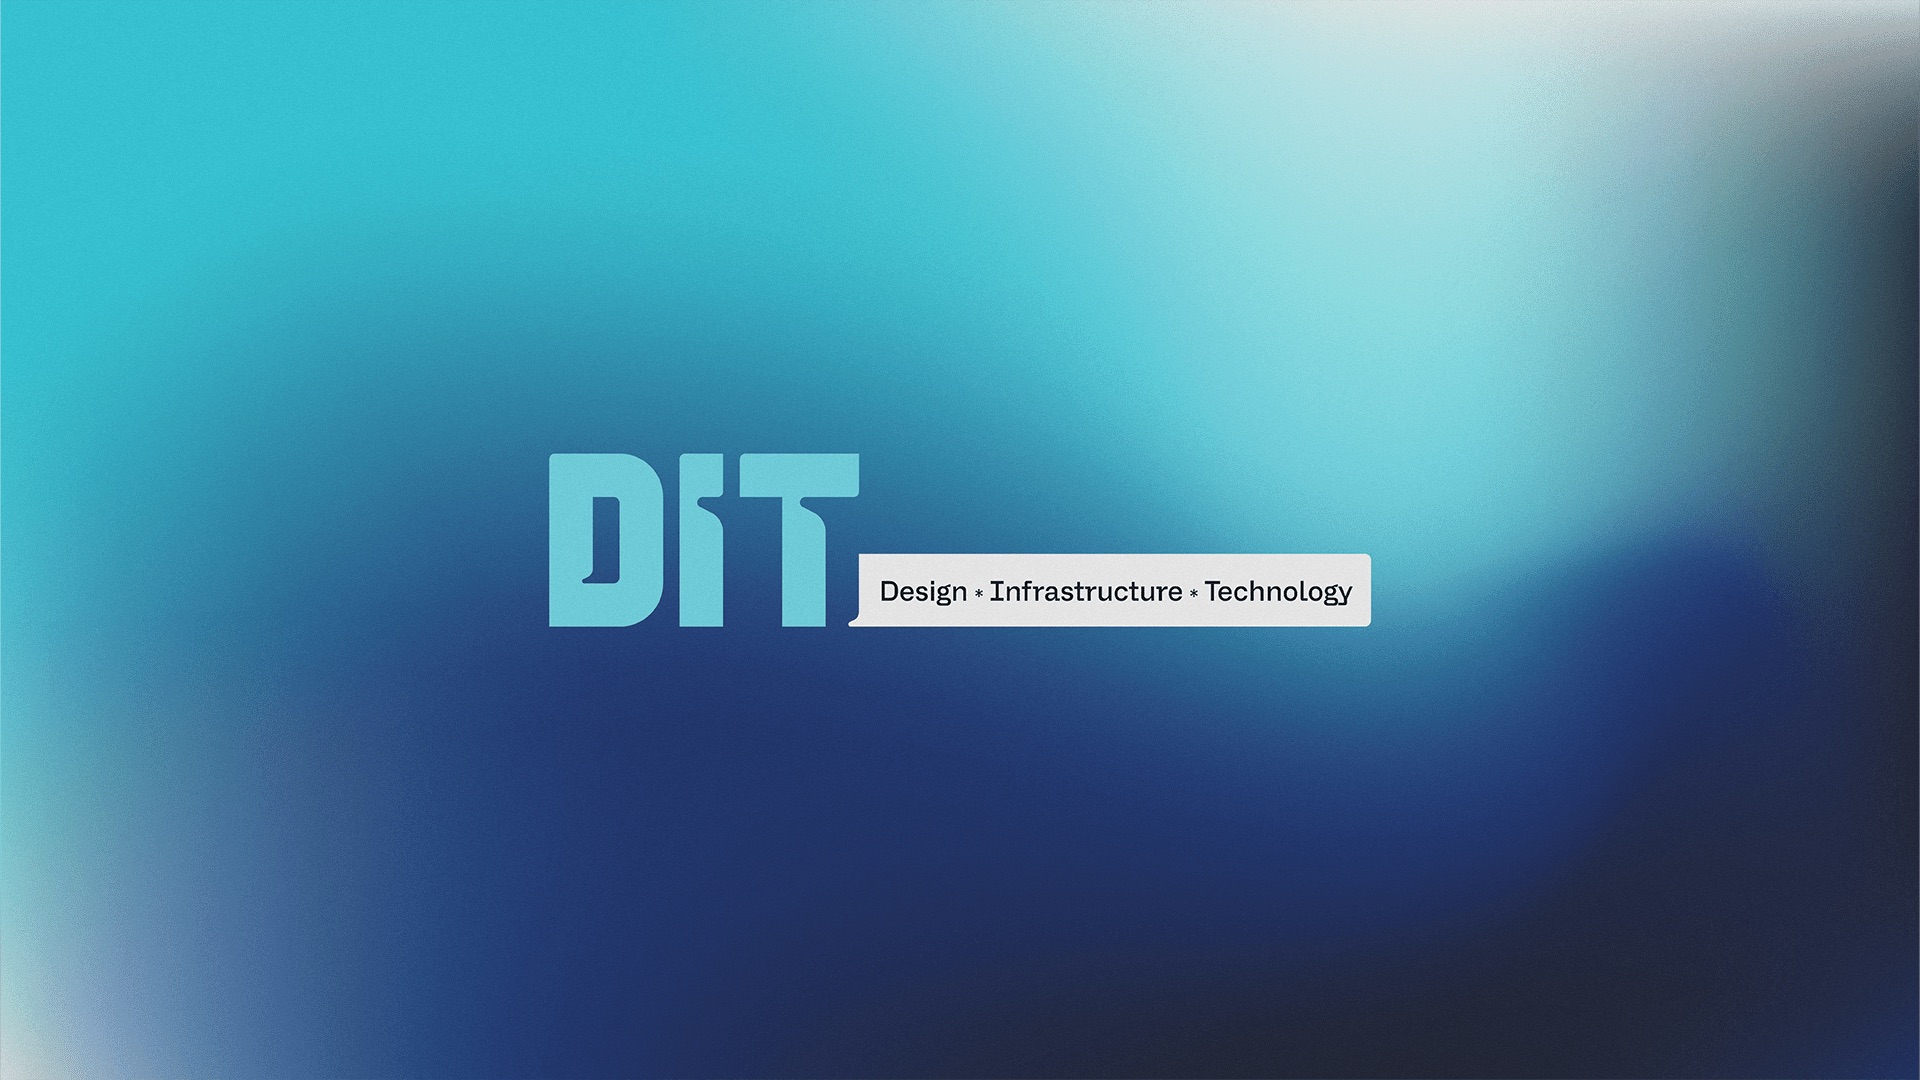 Building the Future of Data Centers: The DIT Brand Identity Case Study by Round